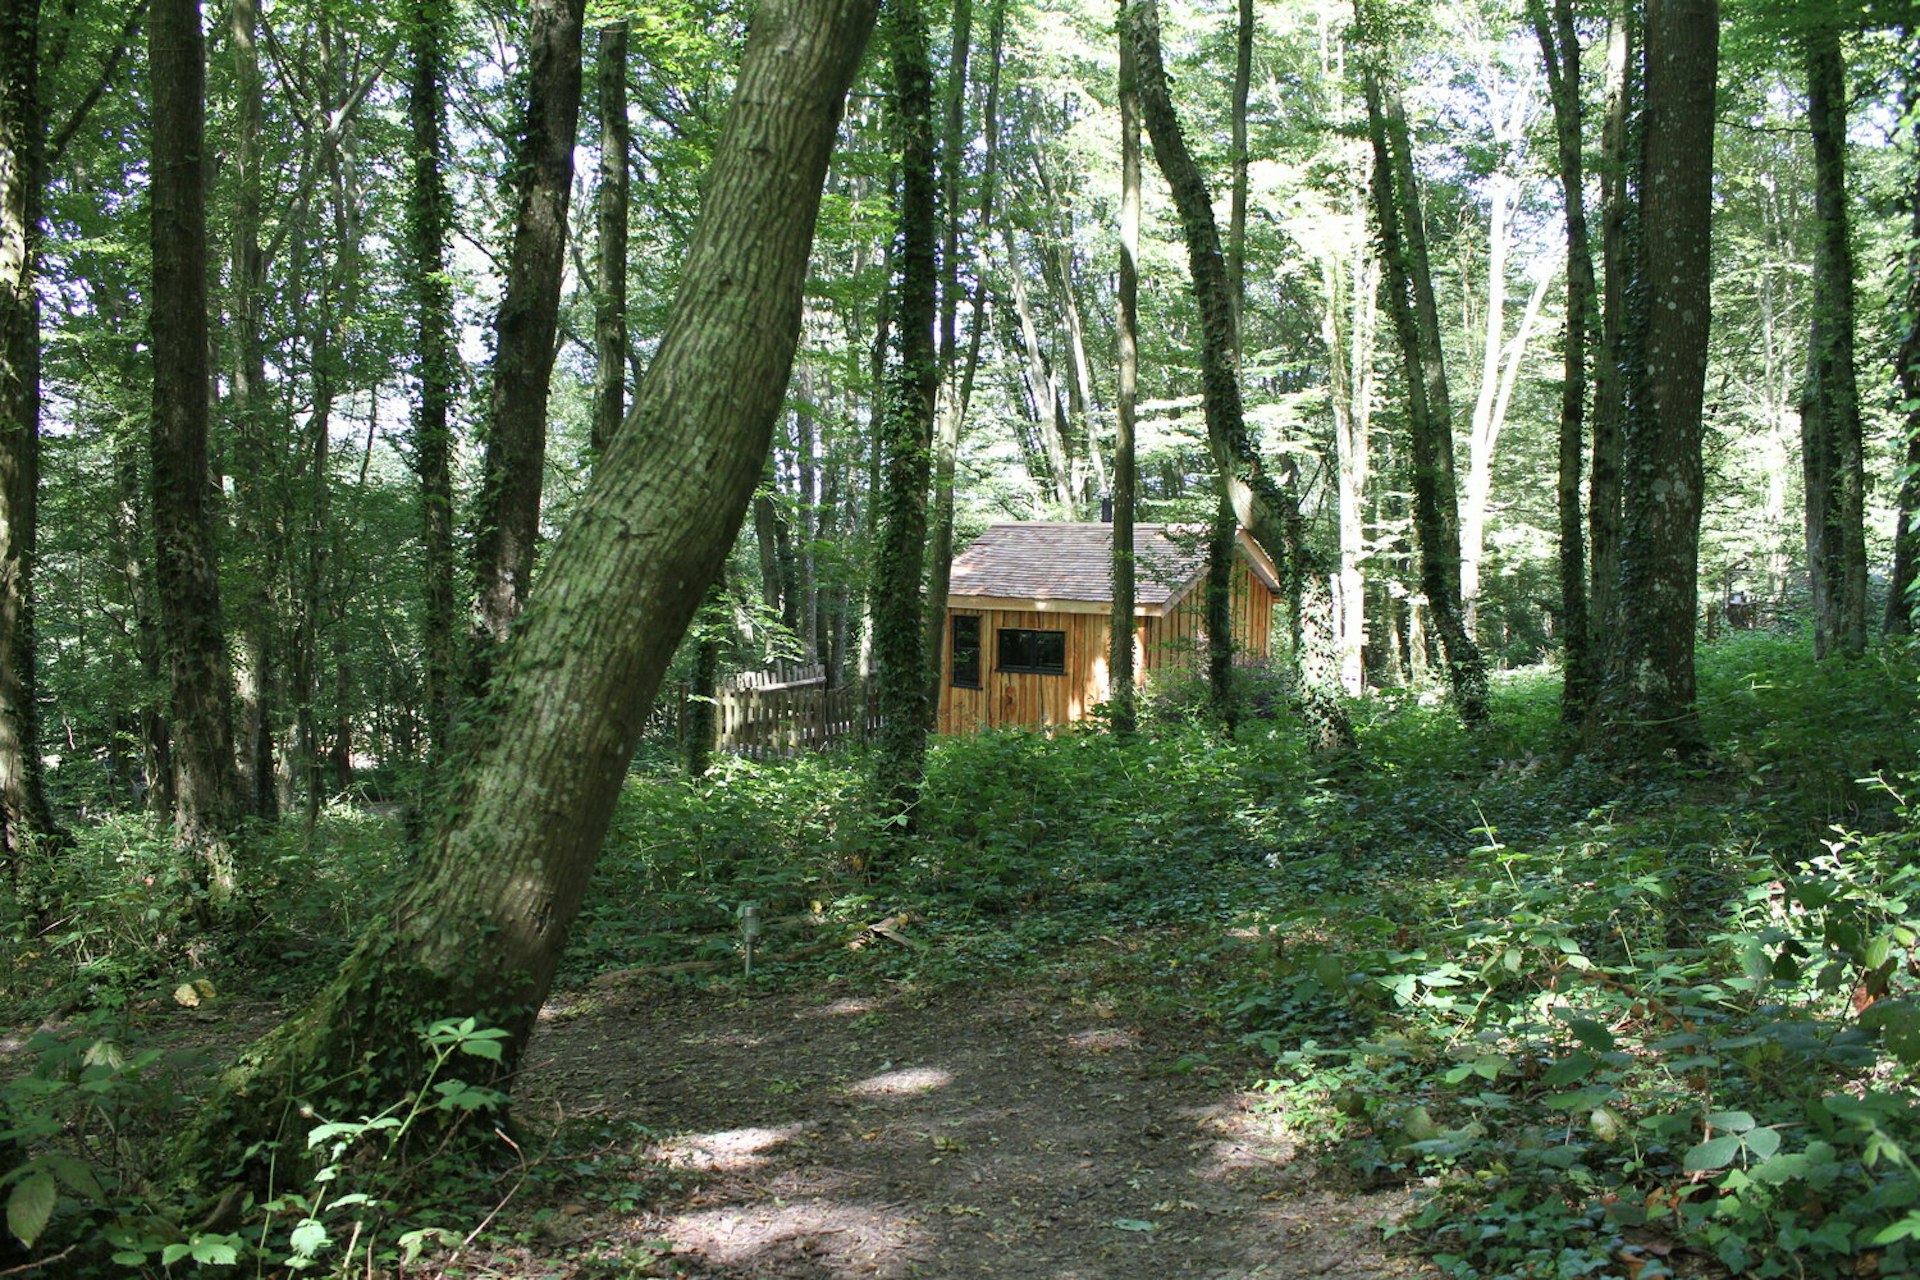 A woodland path leads to a wooden cabin, tucked among the trees